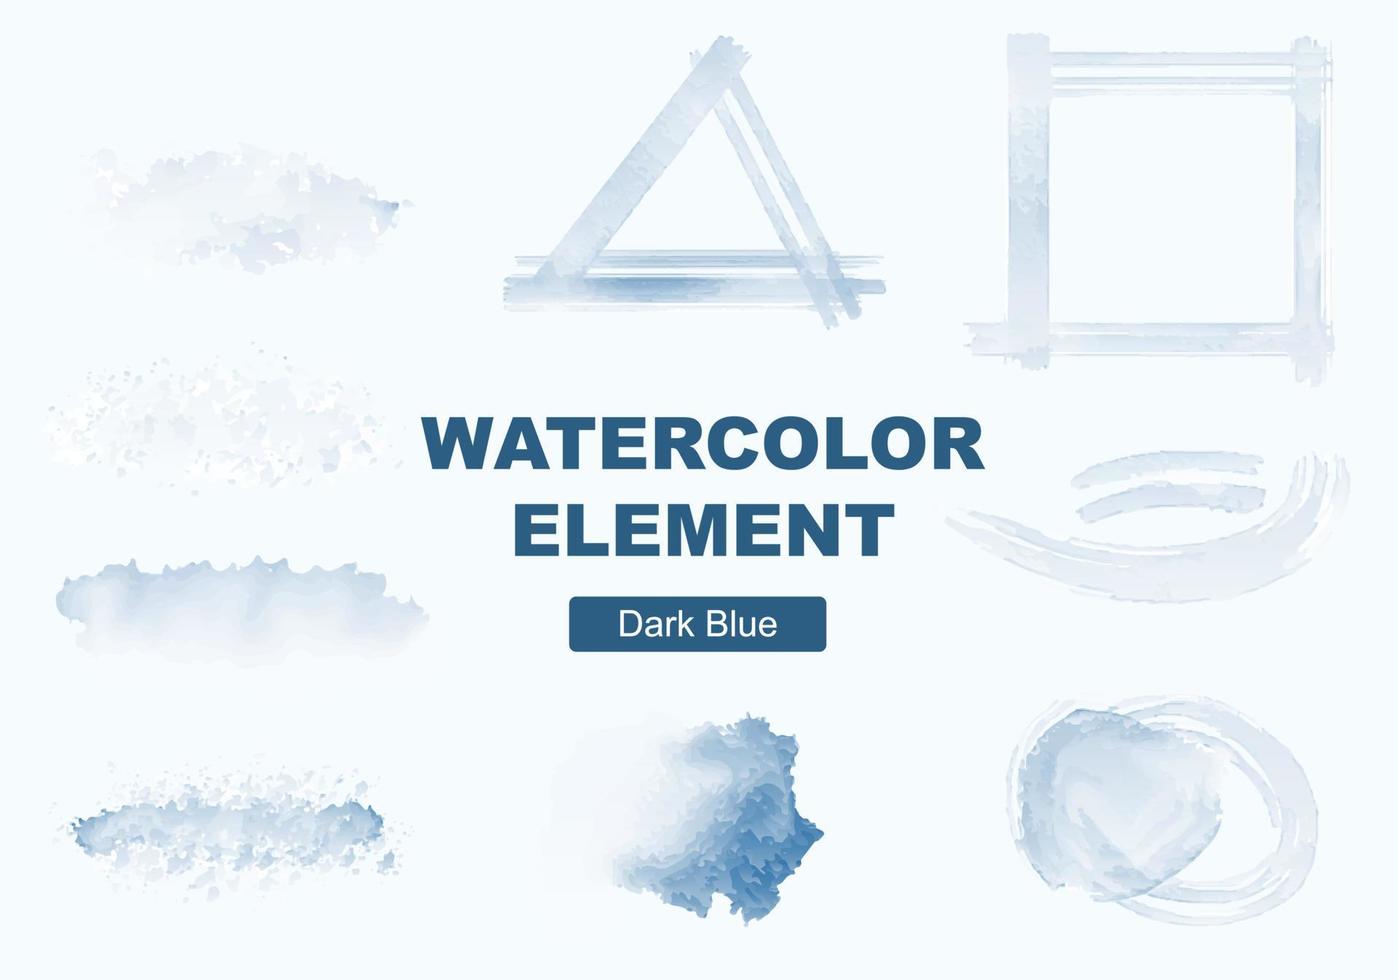 9 watercolor elements for poster, greeting card and banner design needs. Dark blue color theme. Every element has been simplified and easy to edit vector